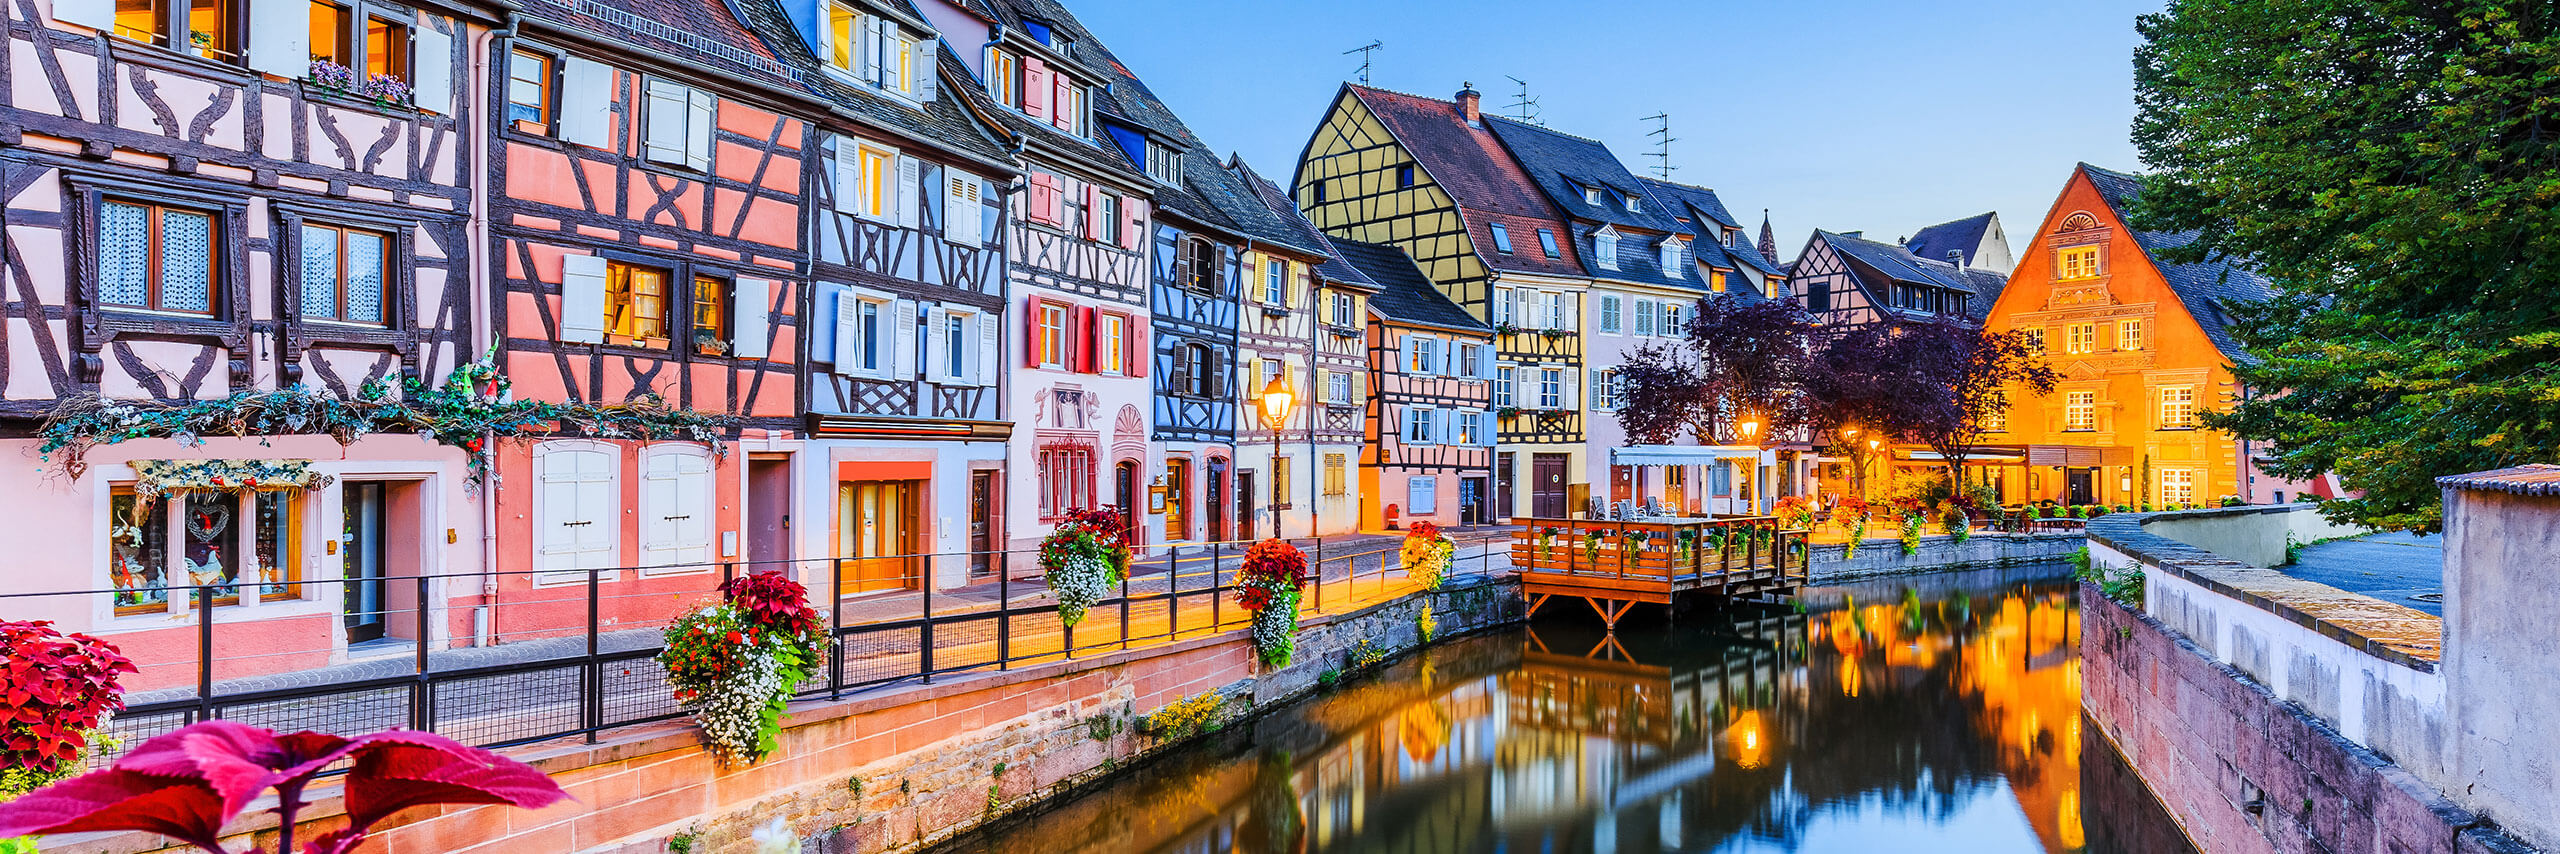 Water canal in Colmar, France